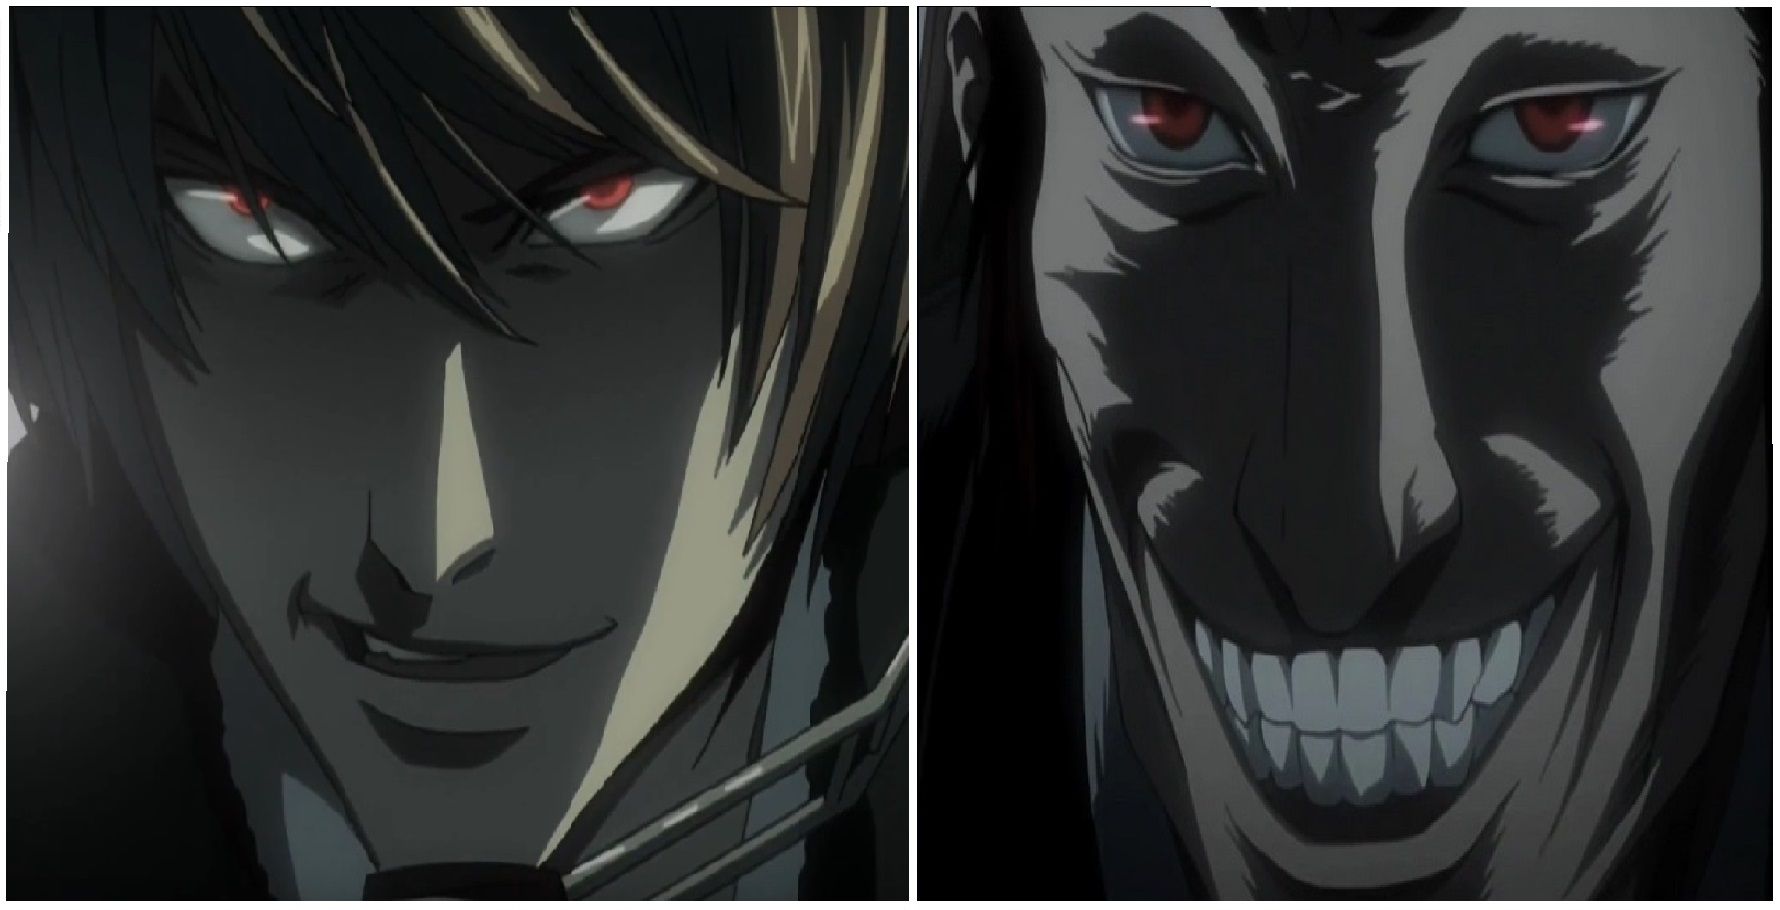 Death Note' Is Missing One Of The Anime's Best Scenes